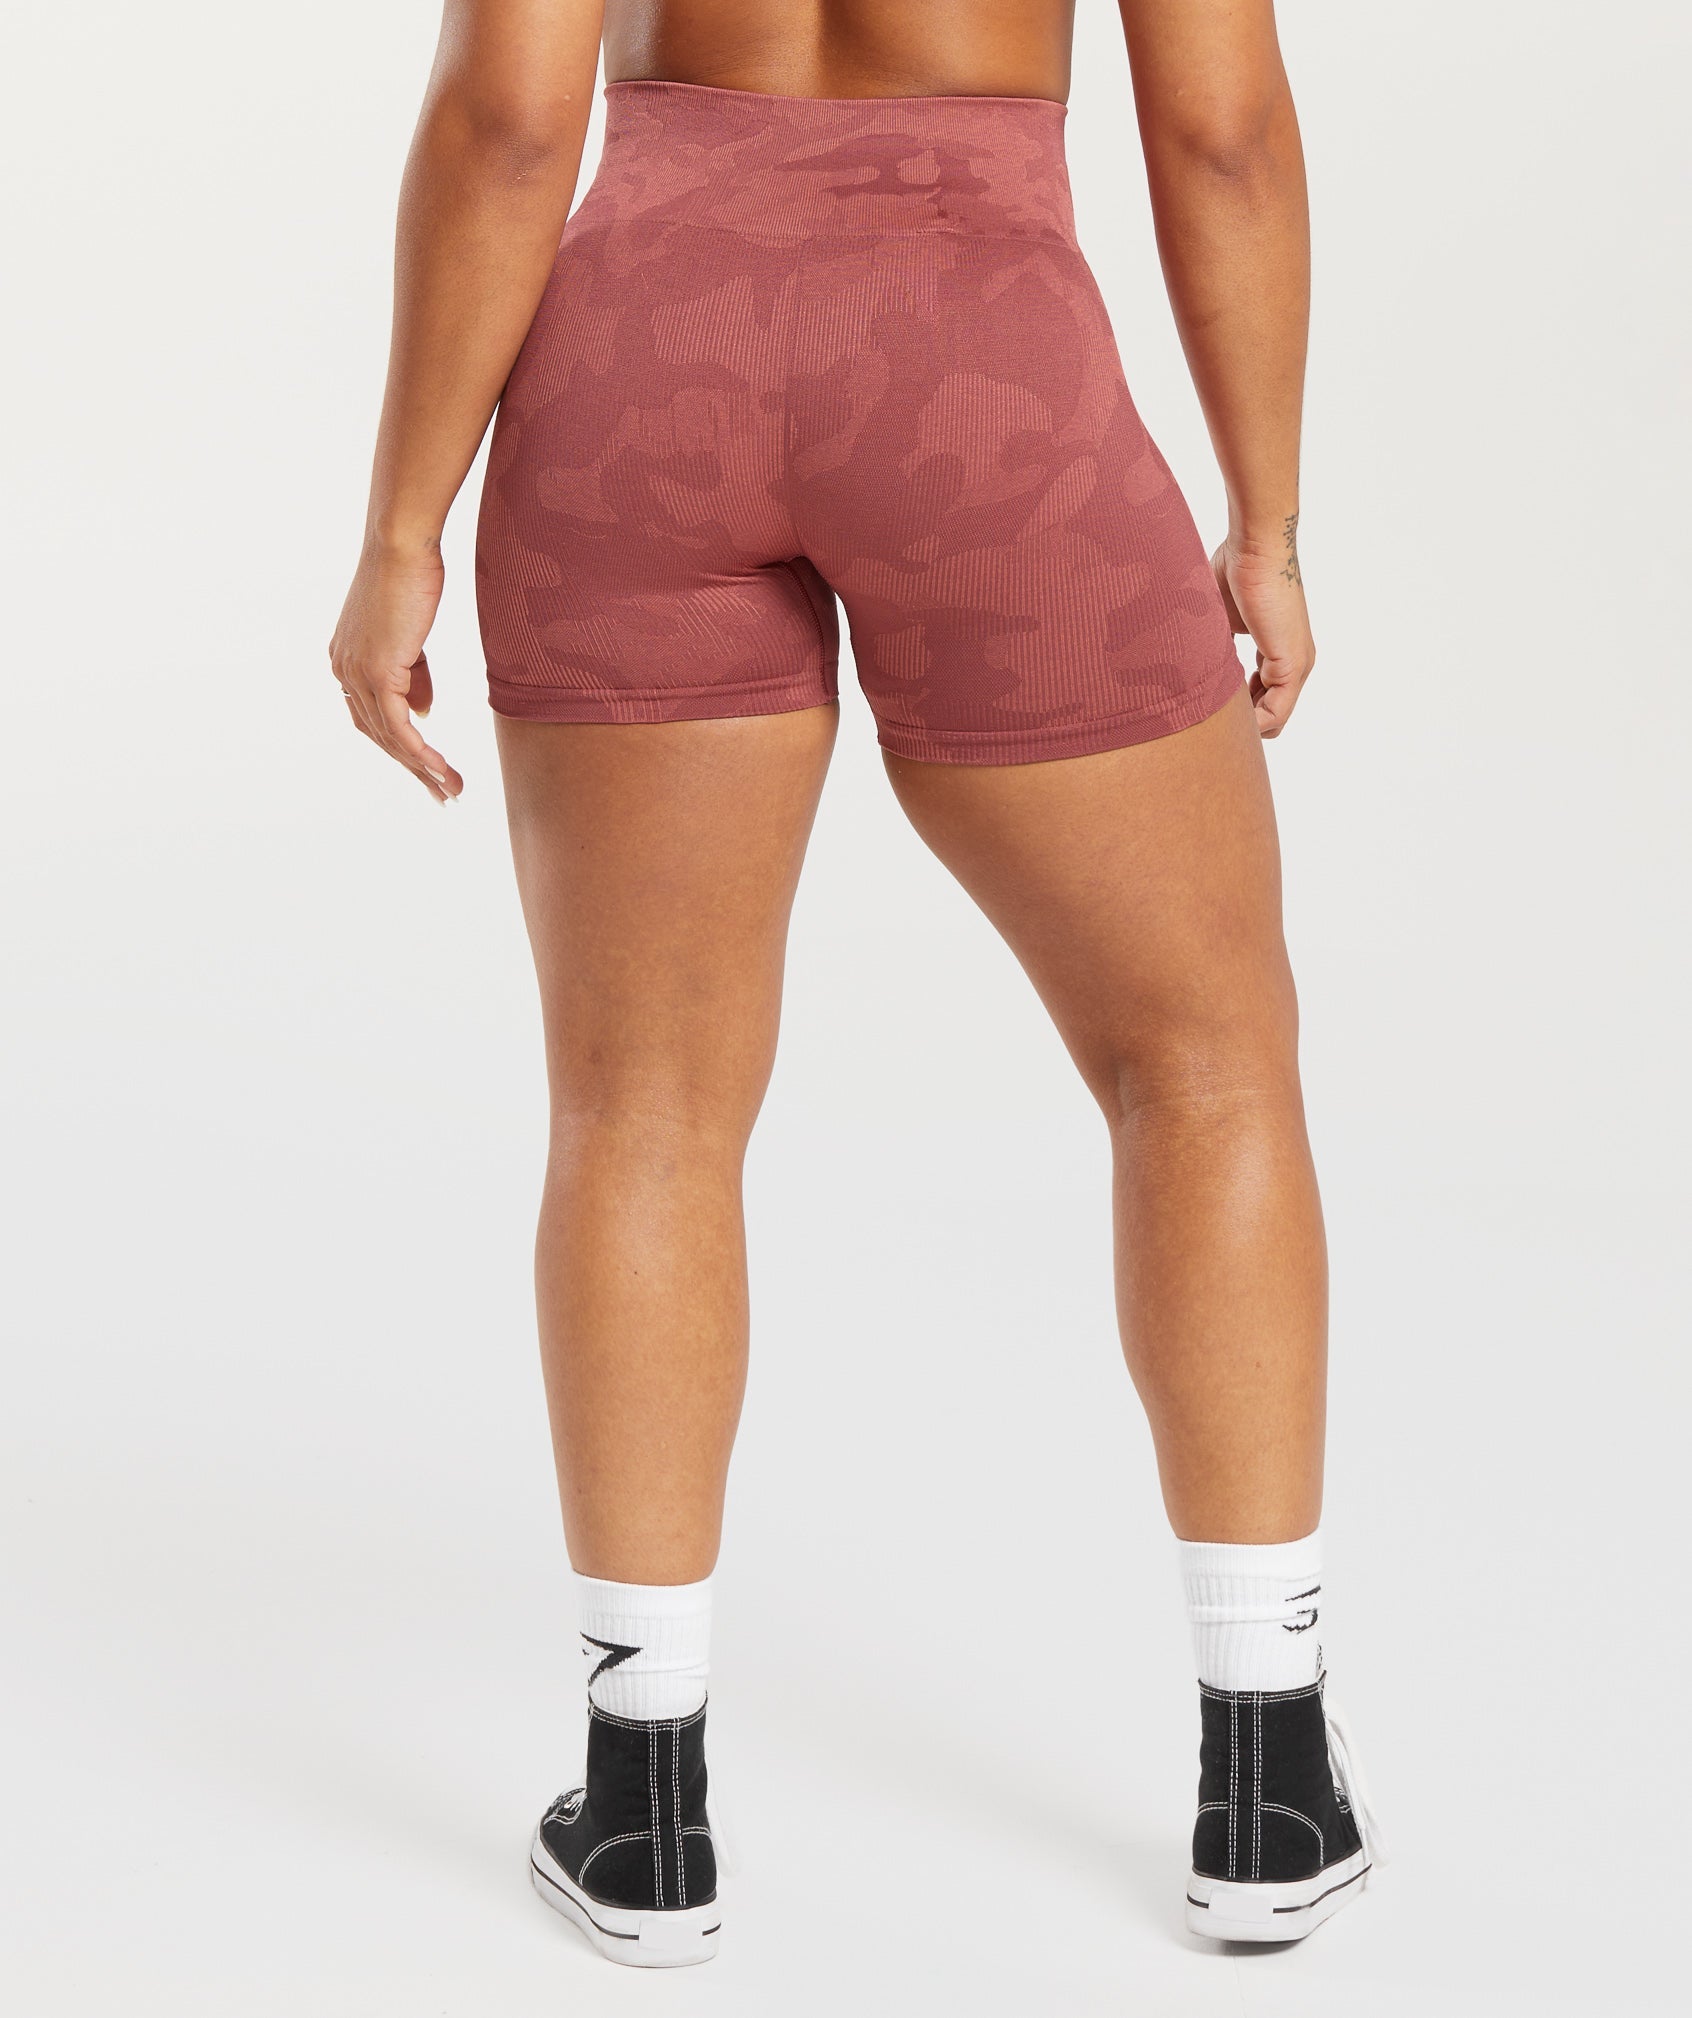 Gymshark Adapt Camo Seamless Ribbed Shorts - Soft Berry/Sunbaked Pink